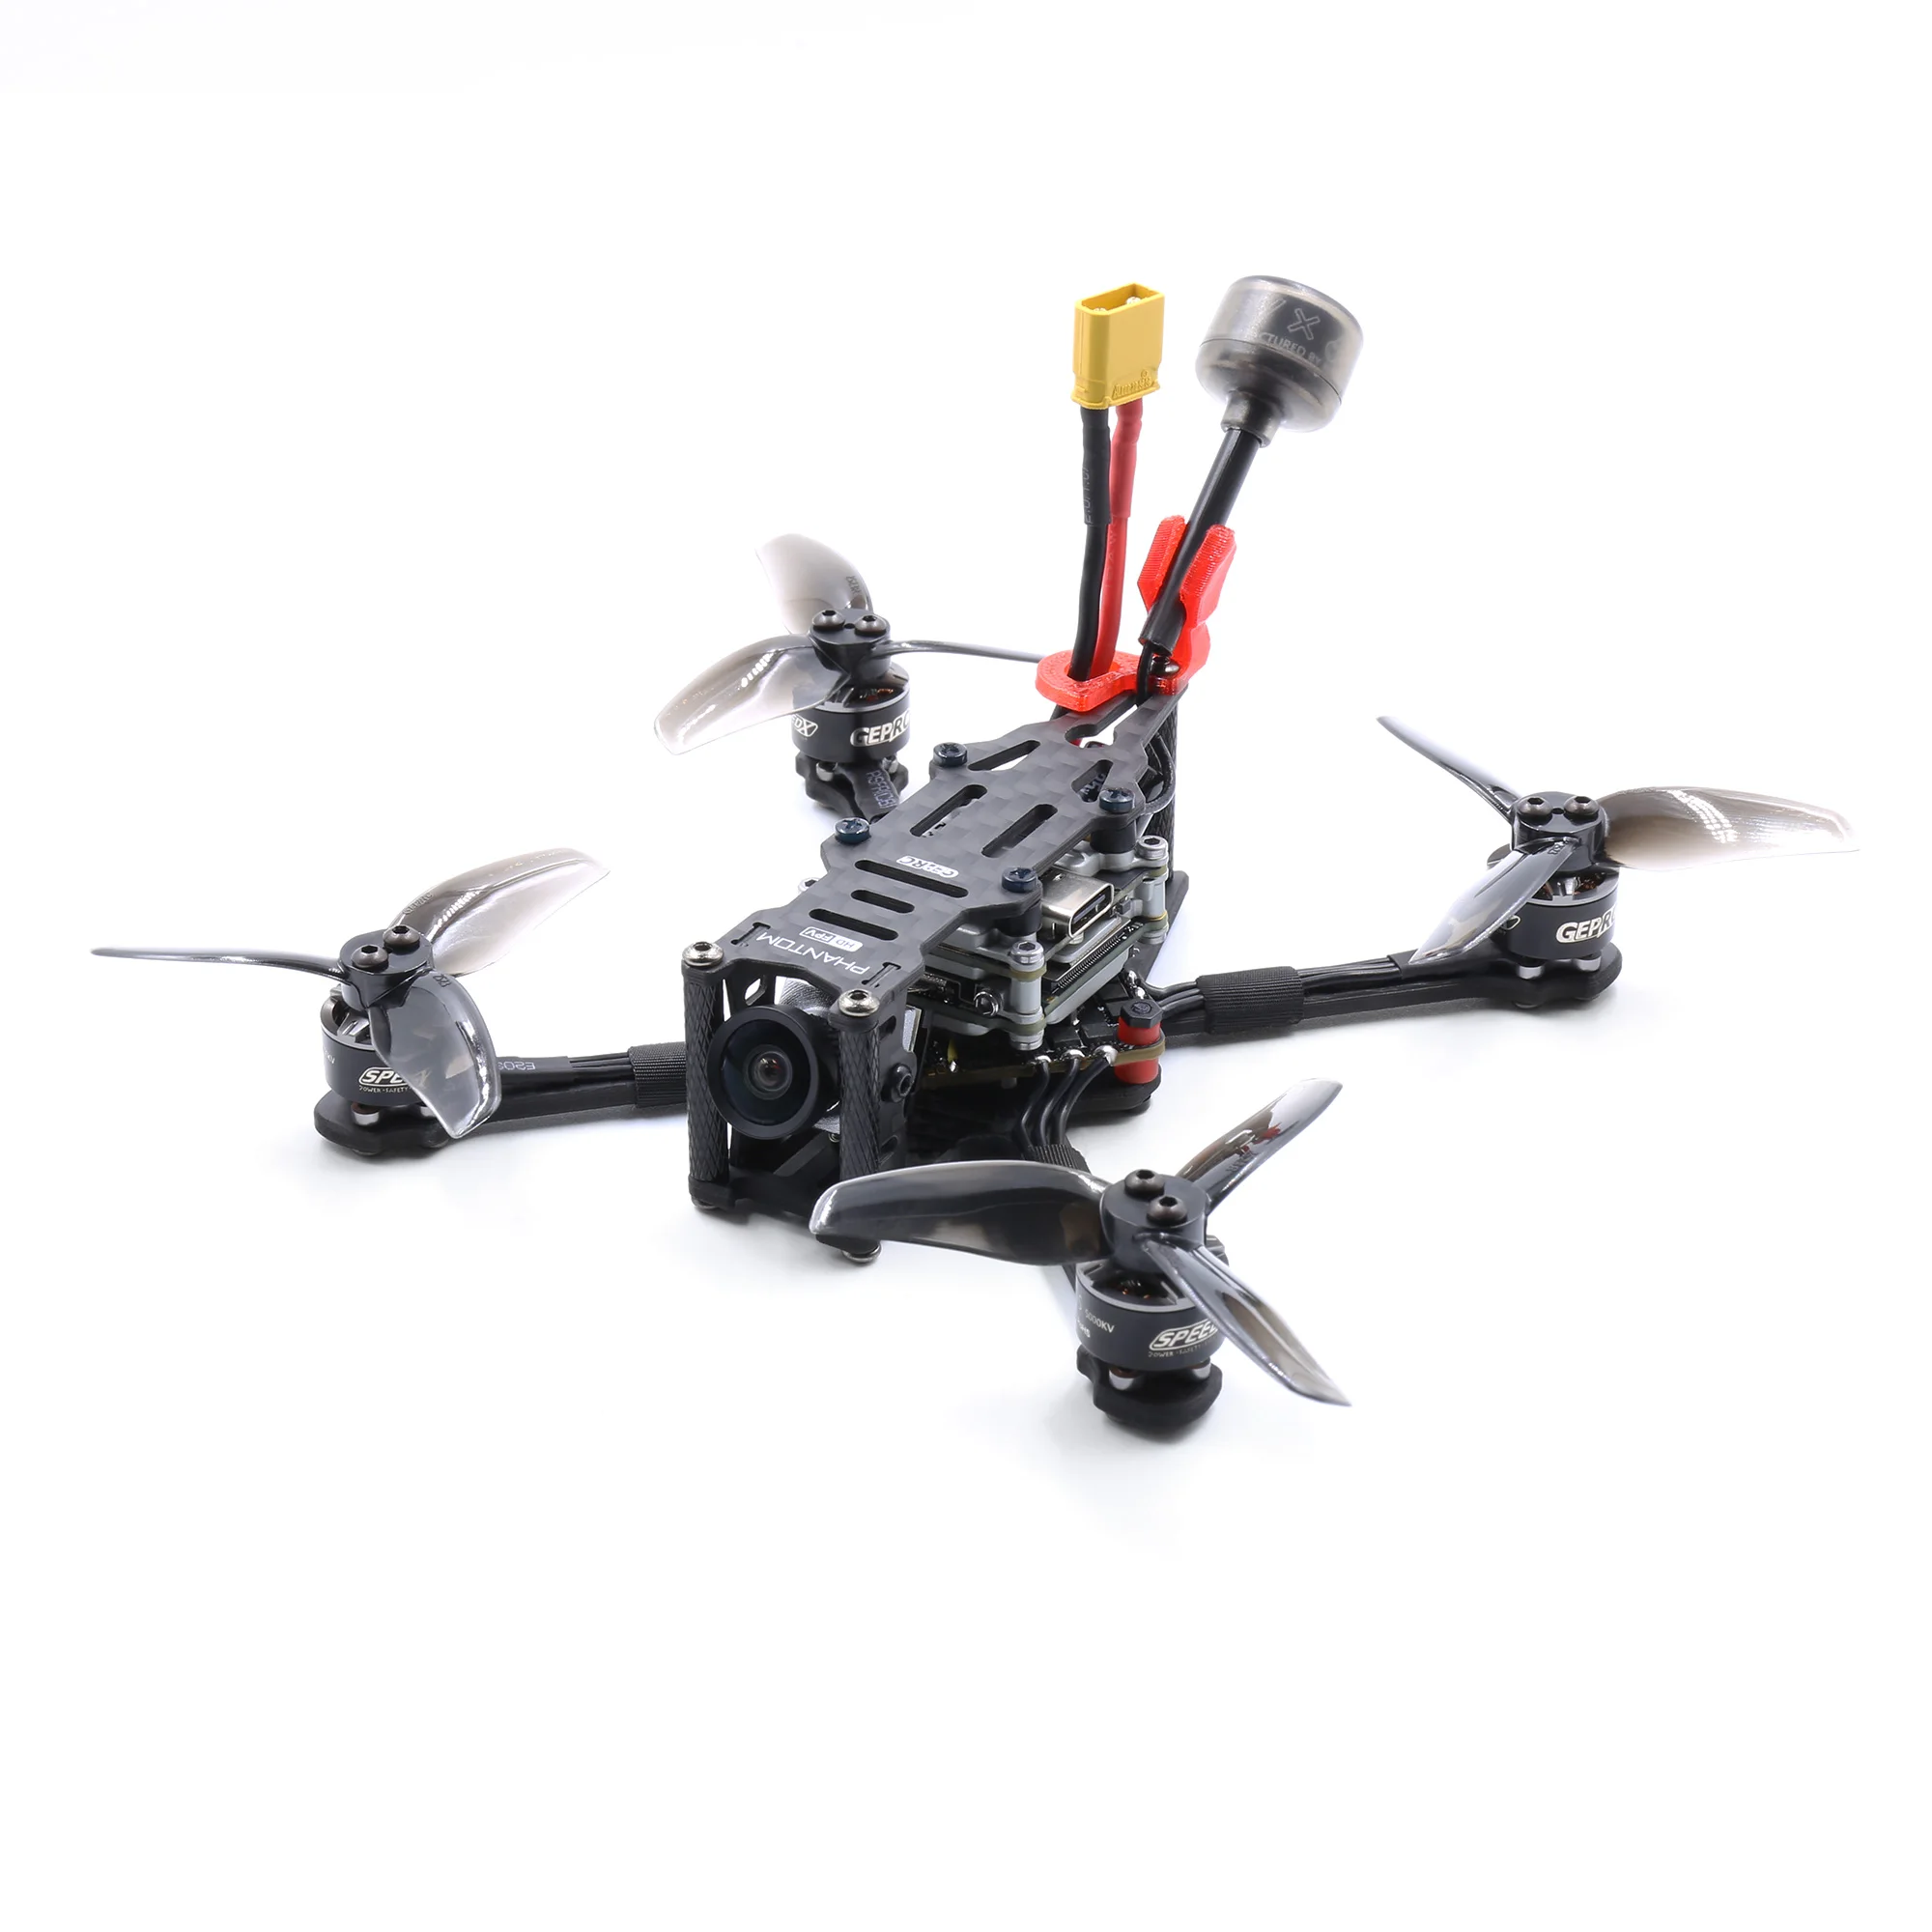 

GEPRC SMART HD Toothpick FPV GEP-20A-F4 AIO GR1105 5000KV 125mm 2.5inch Drone For RC FPV Quadcopter Lightweight Freestyle Drone